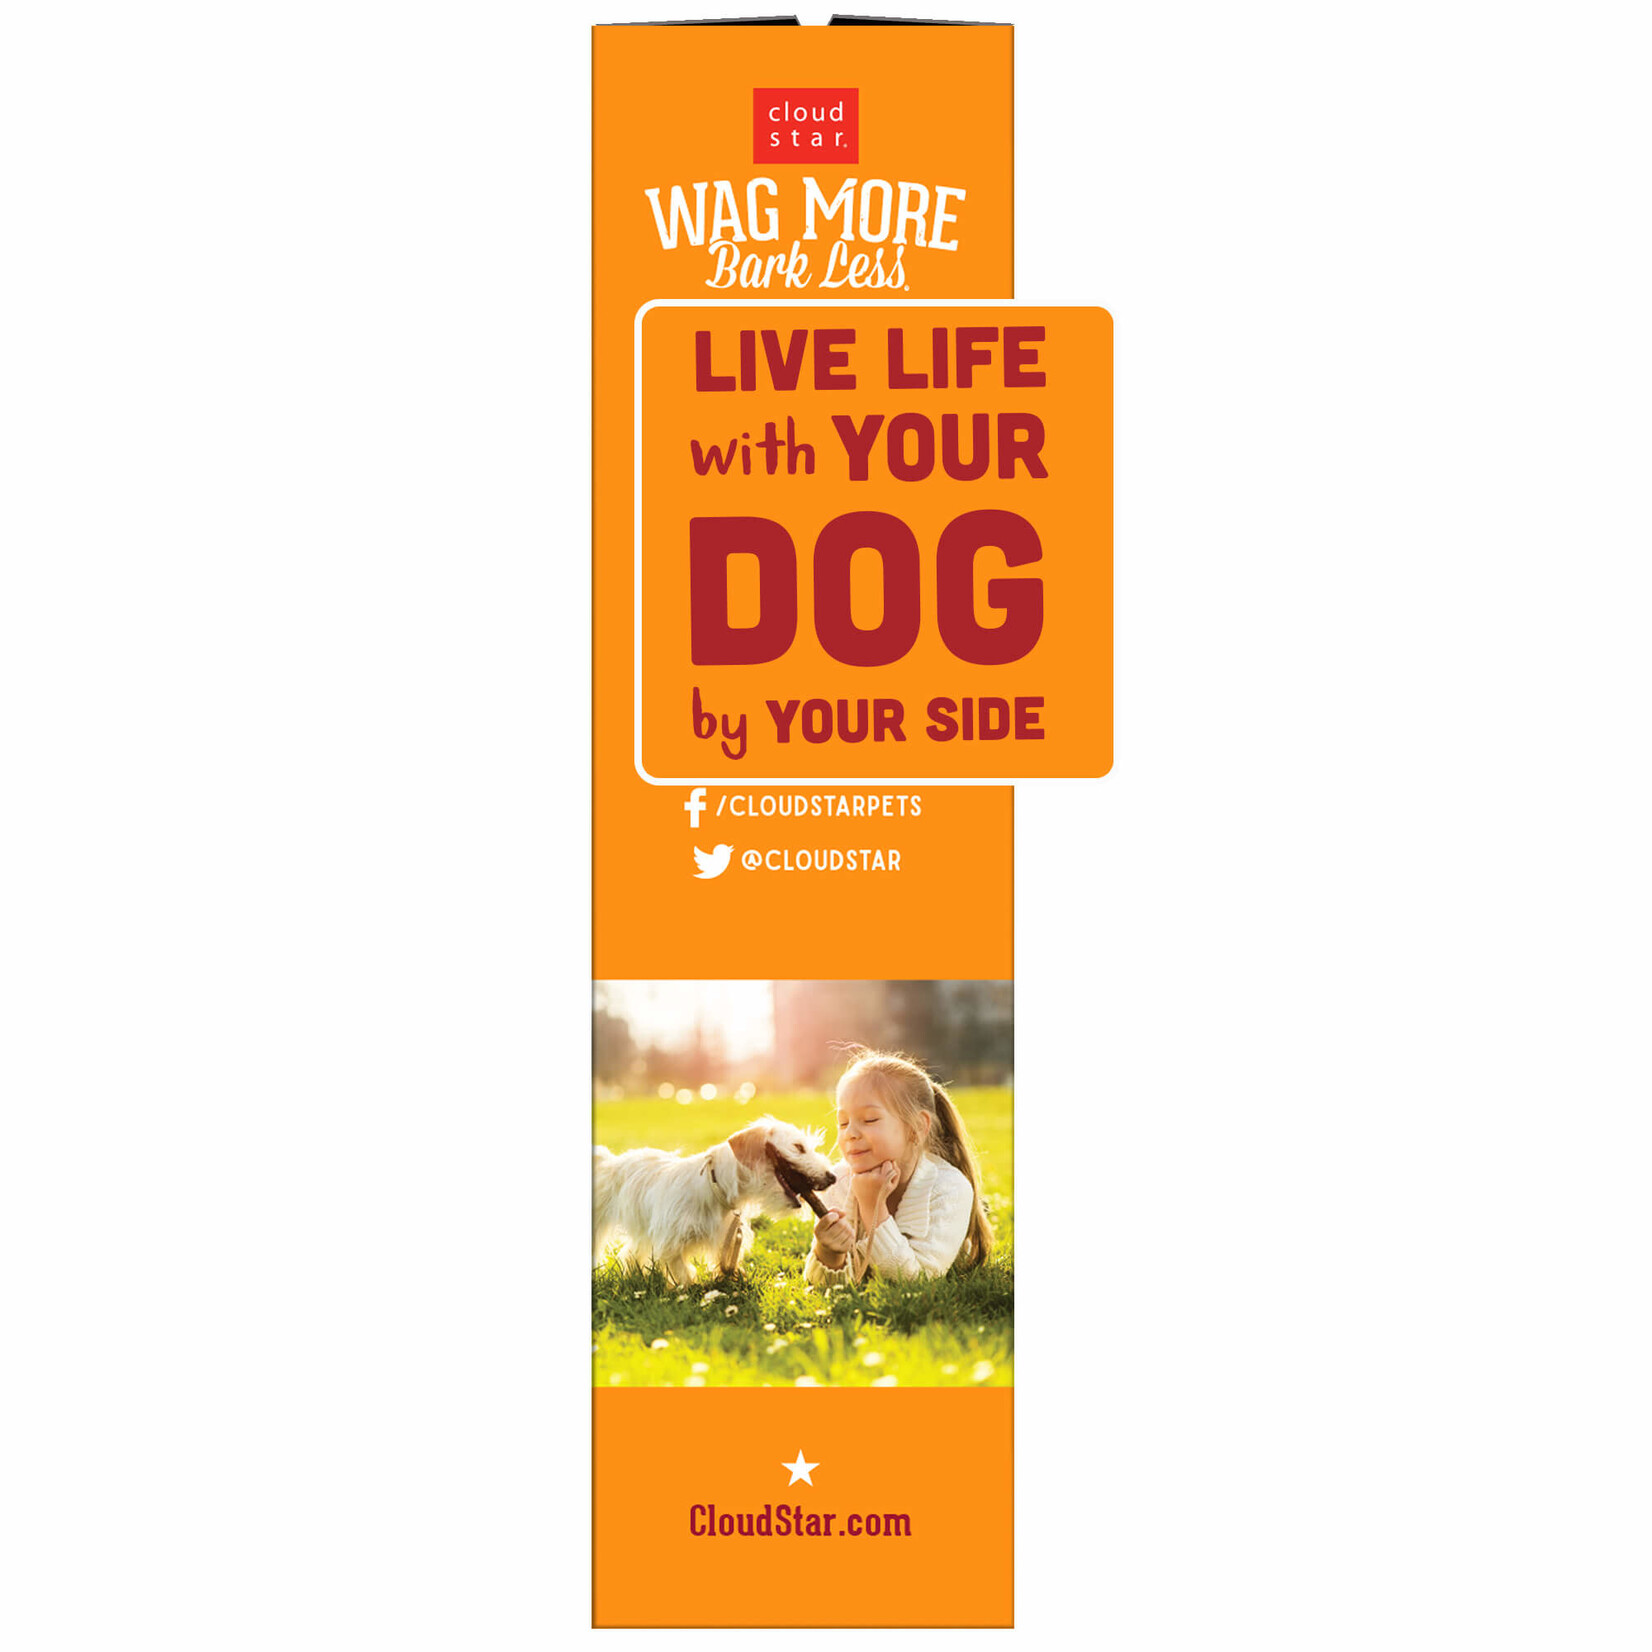 Wag More Bark Less Oven Baked Biscuits with Pumpkin